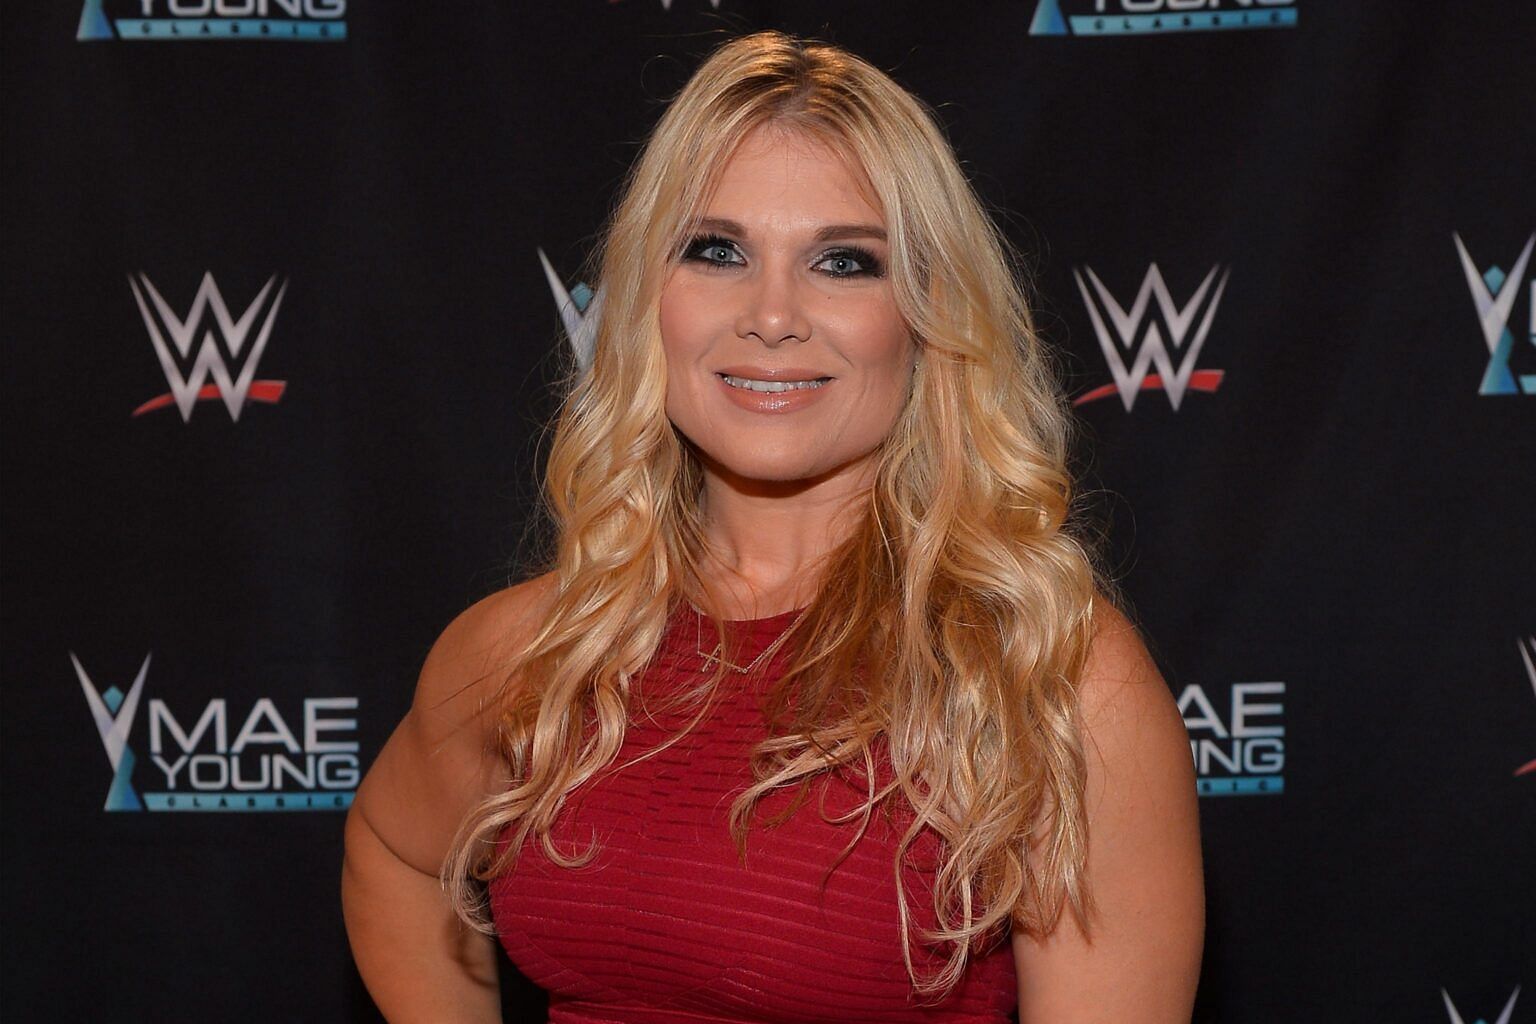 Beth Phoenix left WWE NXT to spend some time with her family